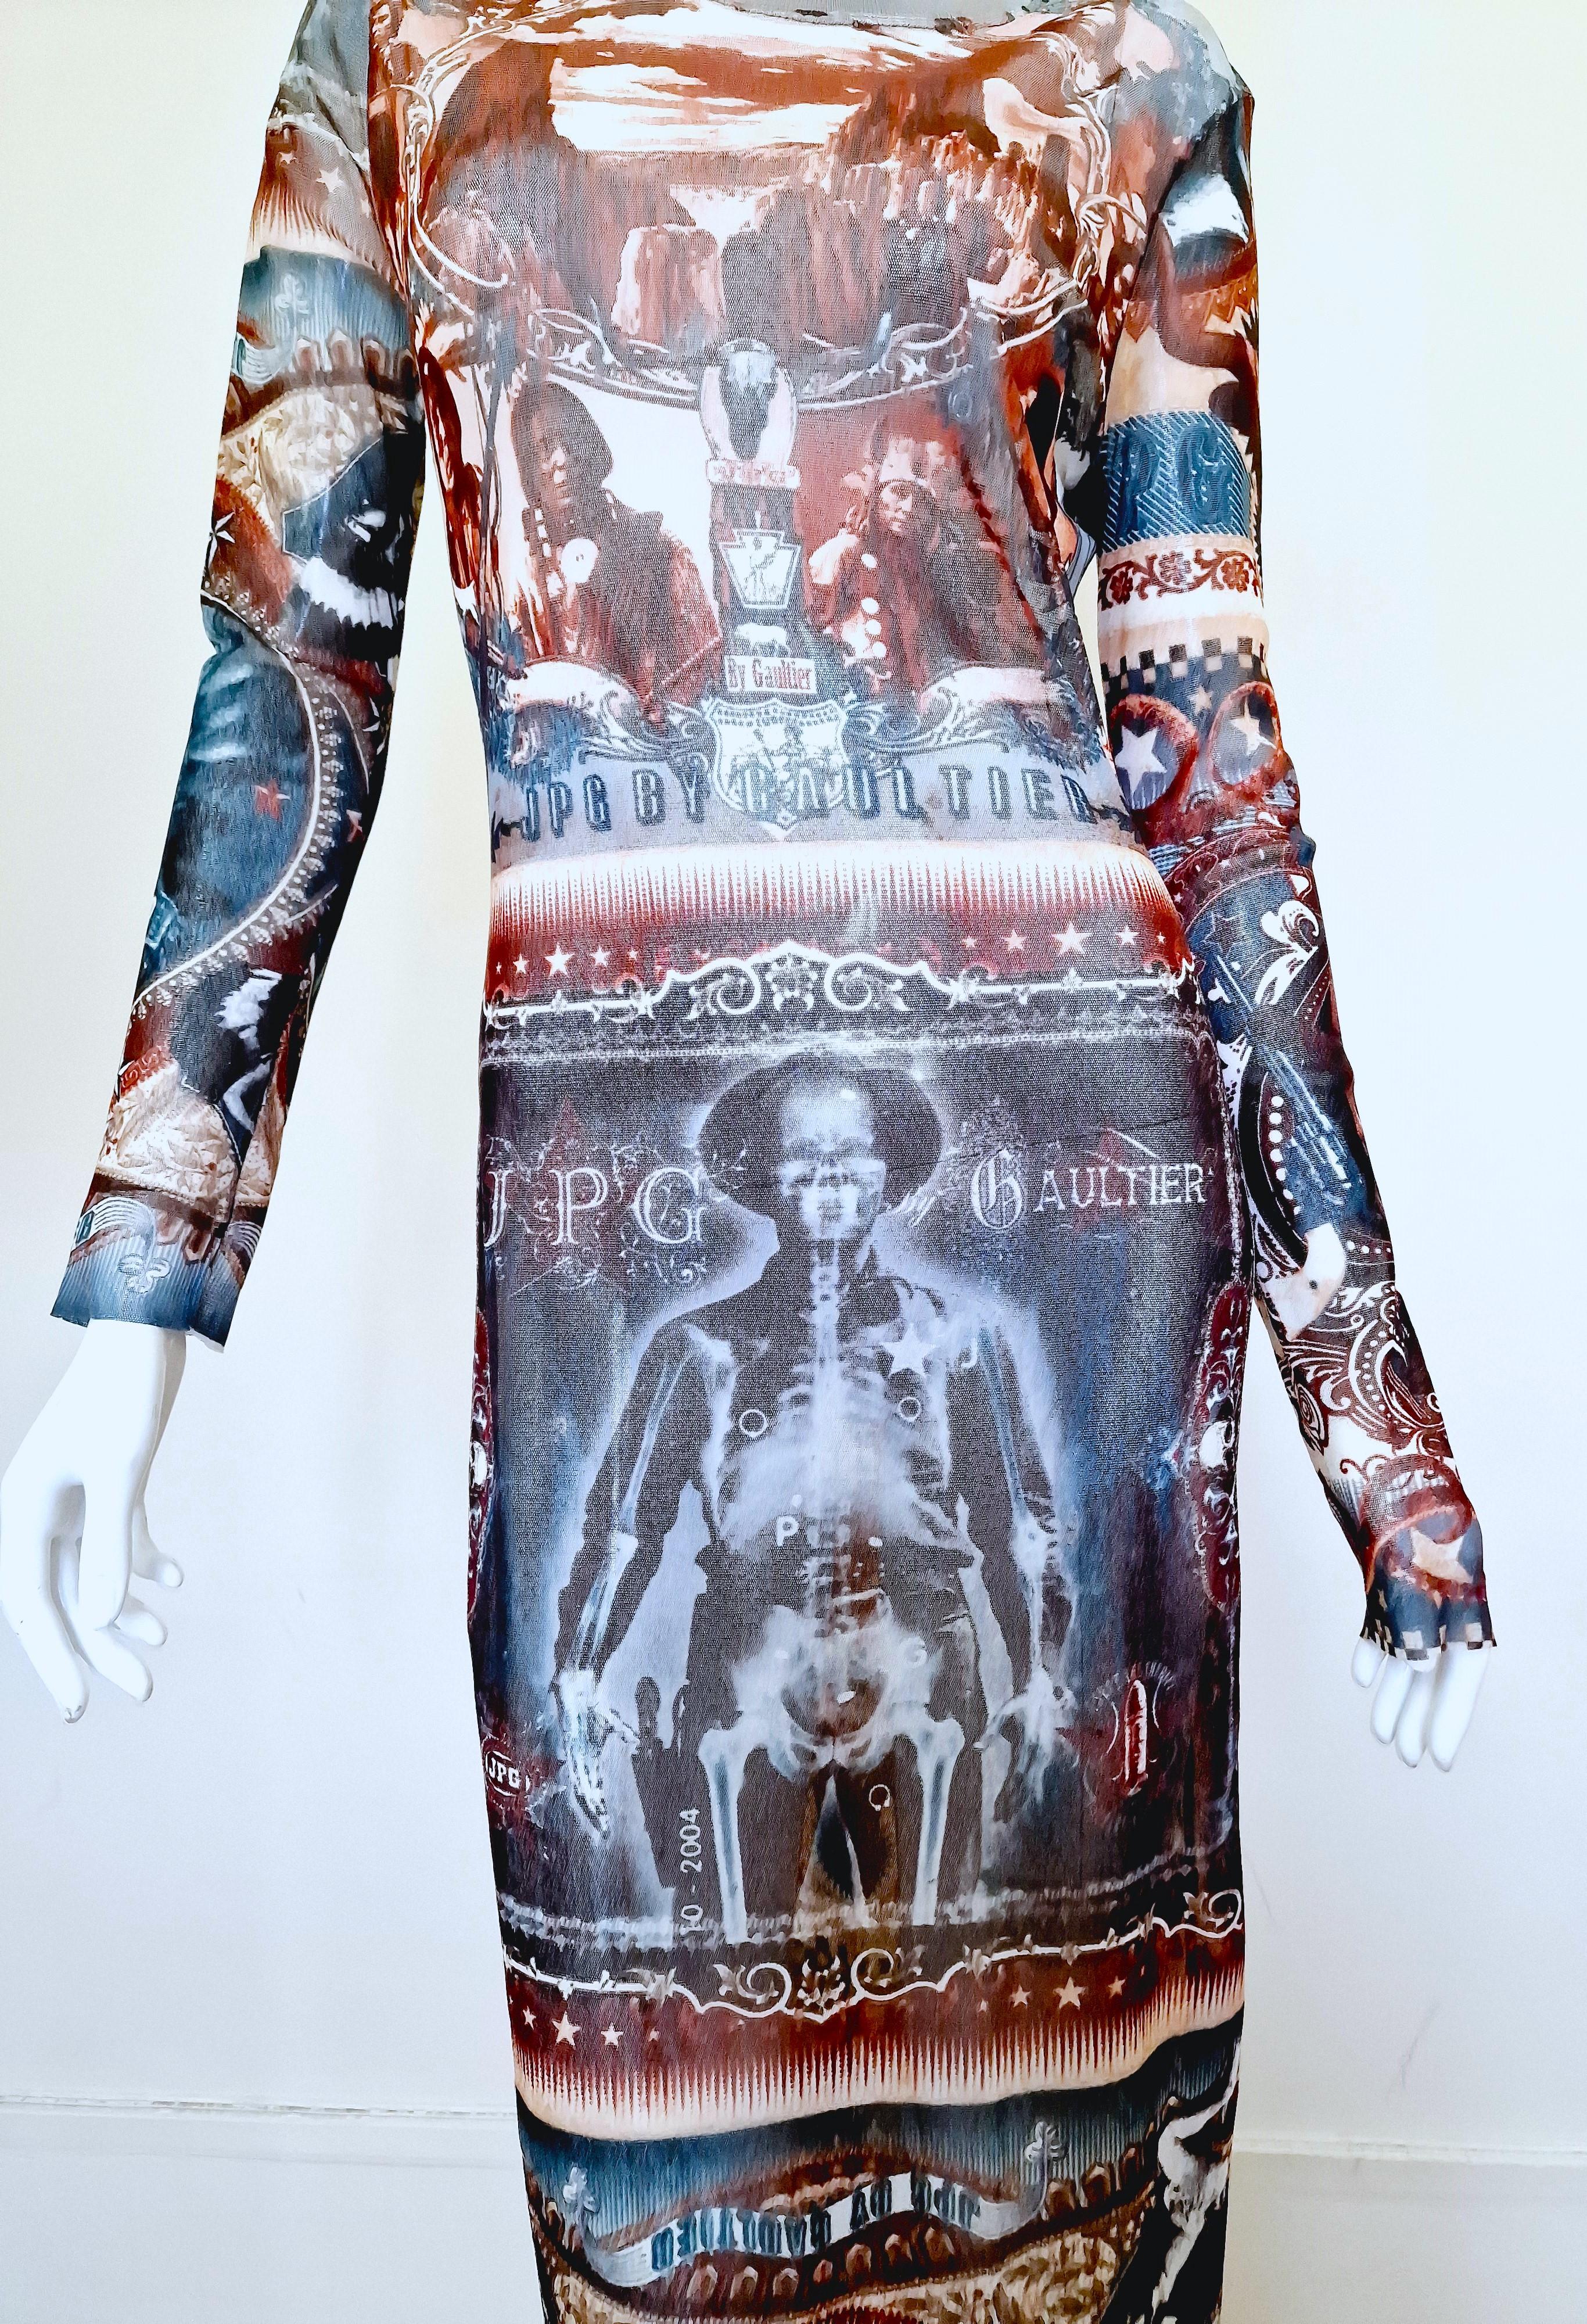 Jean Paul Gaultier mesh dress with the iconic fabulous Indian style print and X-ray skeletons. Signature back tab.
The dress is a reflection about the Native Indian and USA history...

Pattern:X-ray skeleton
Native Indians
Bulls
Stars
